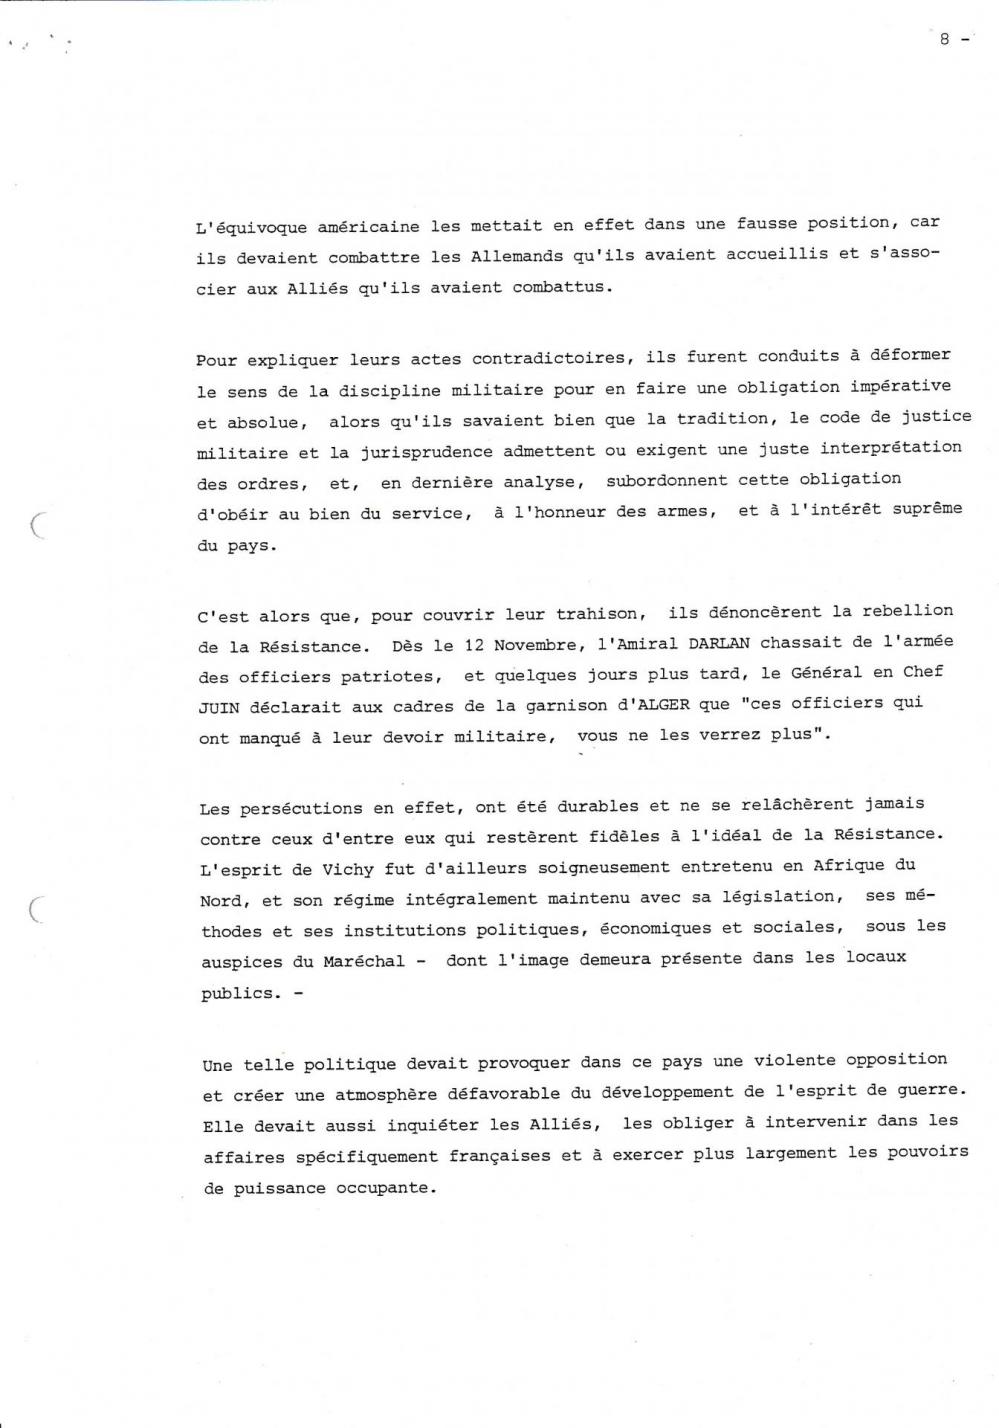 General jousse page8